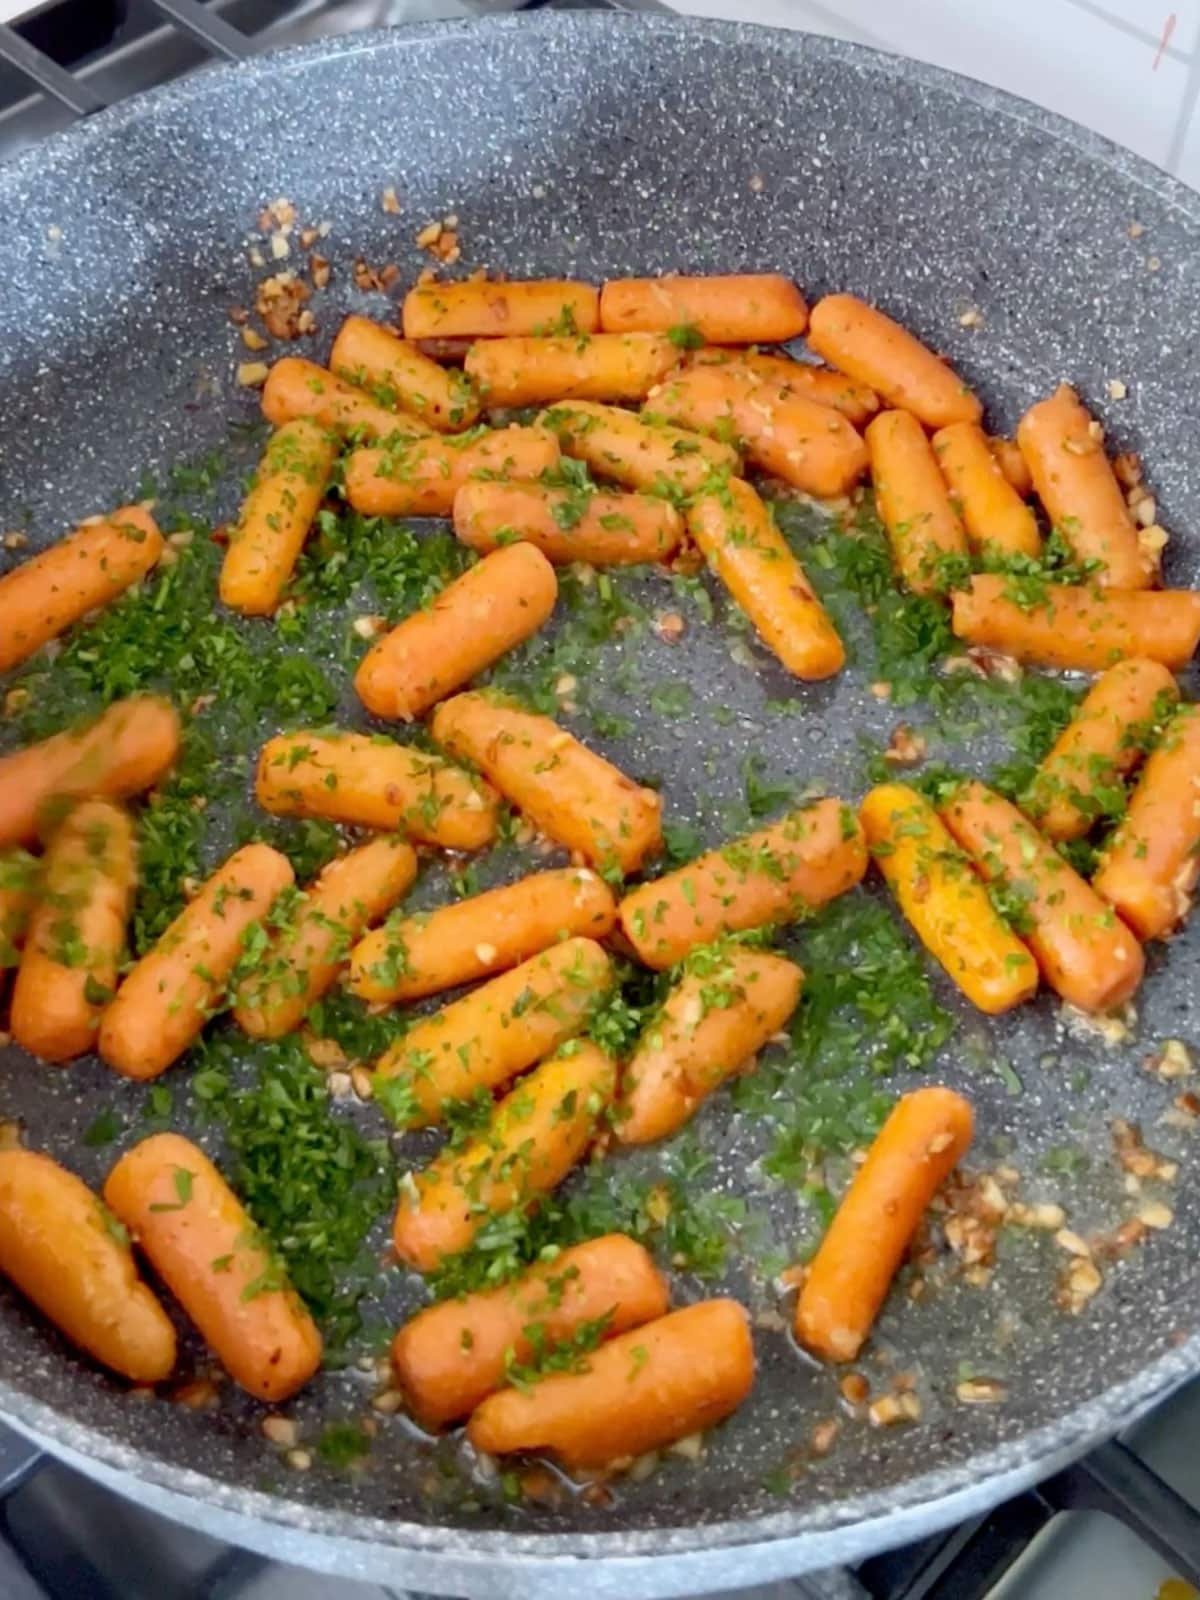 Parsley being sprinkled over the cooked carrots.